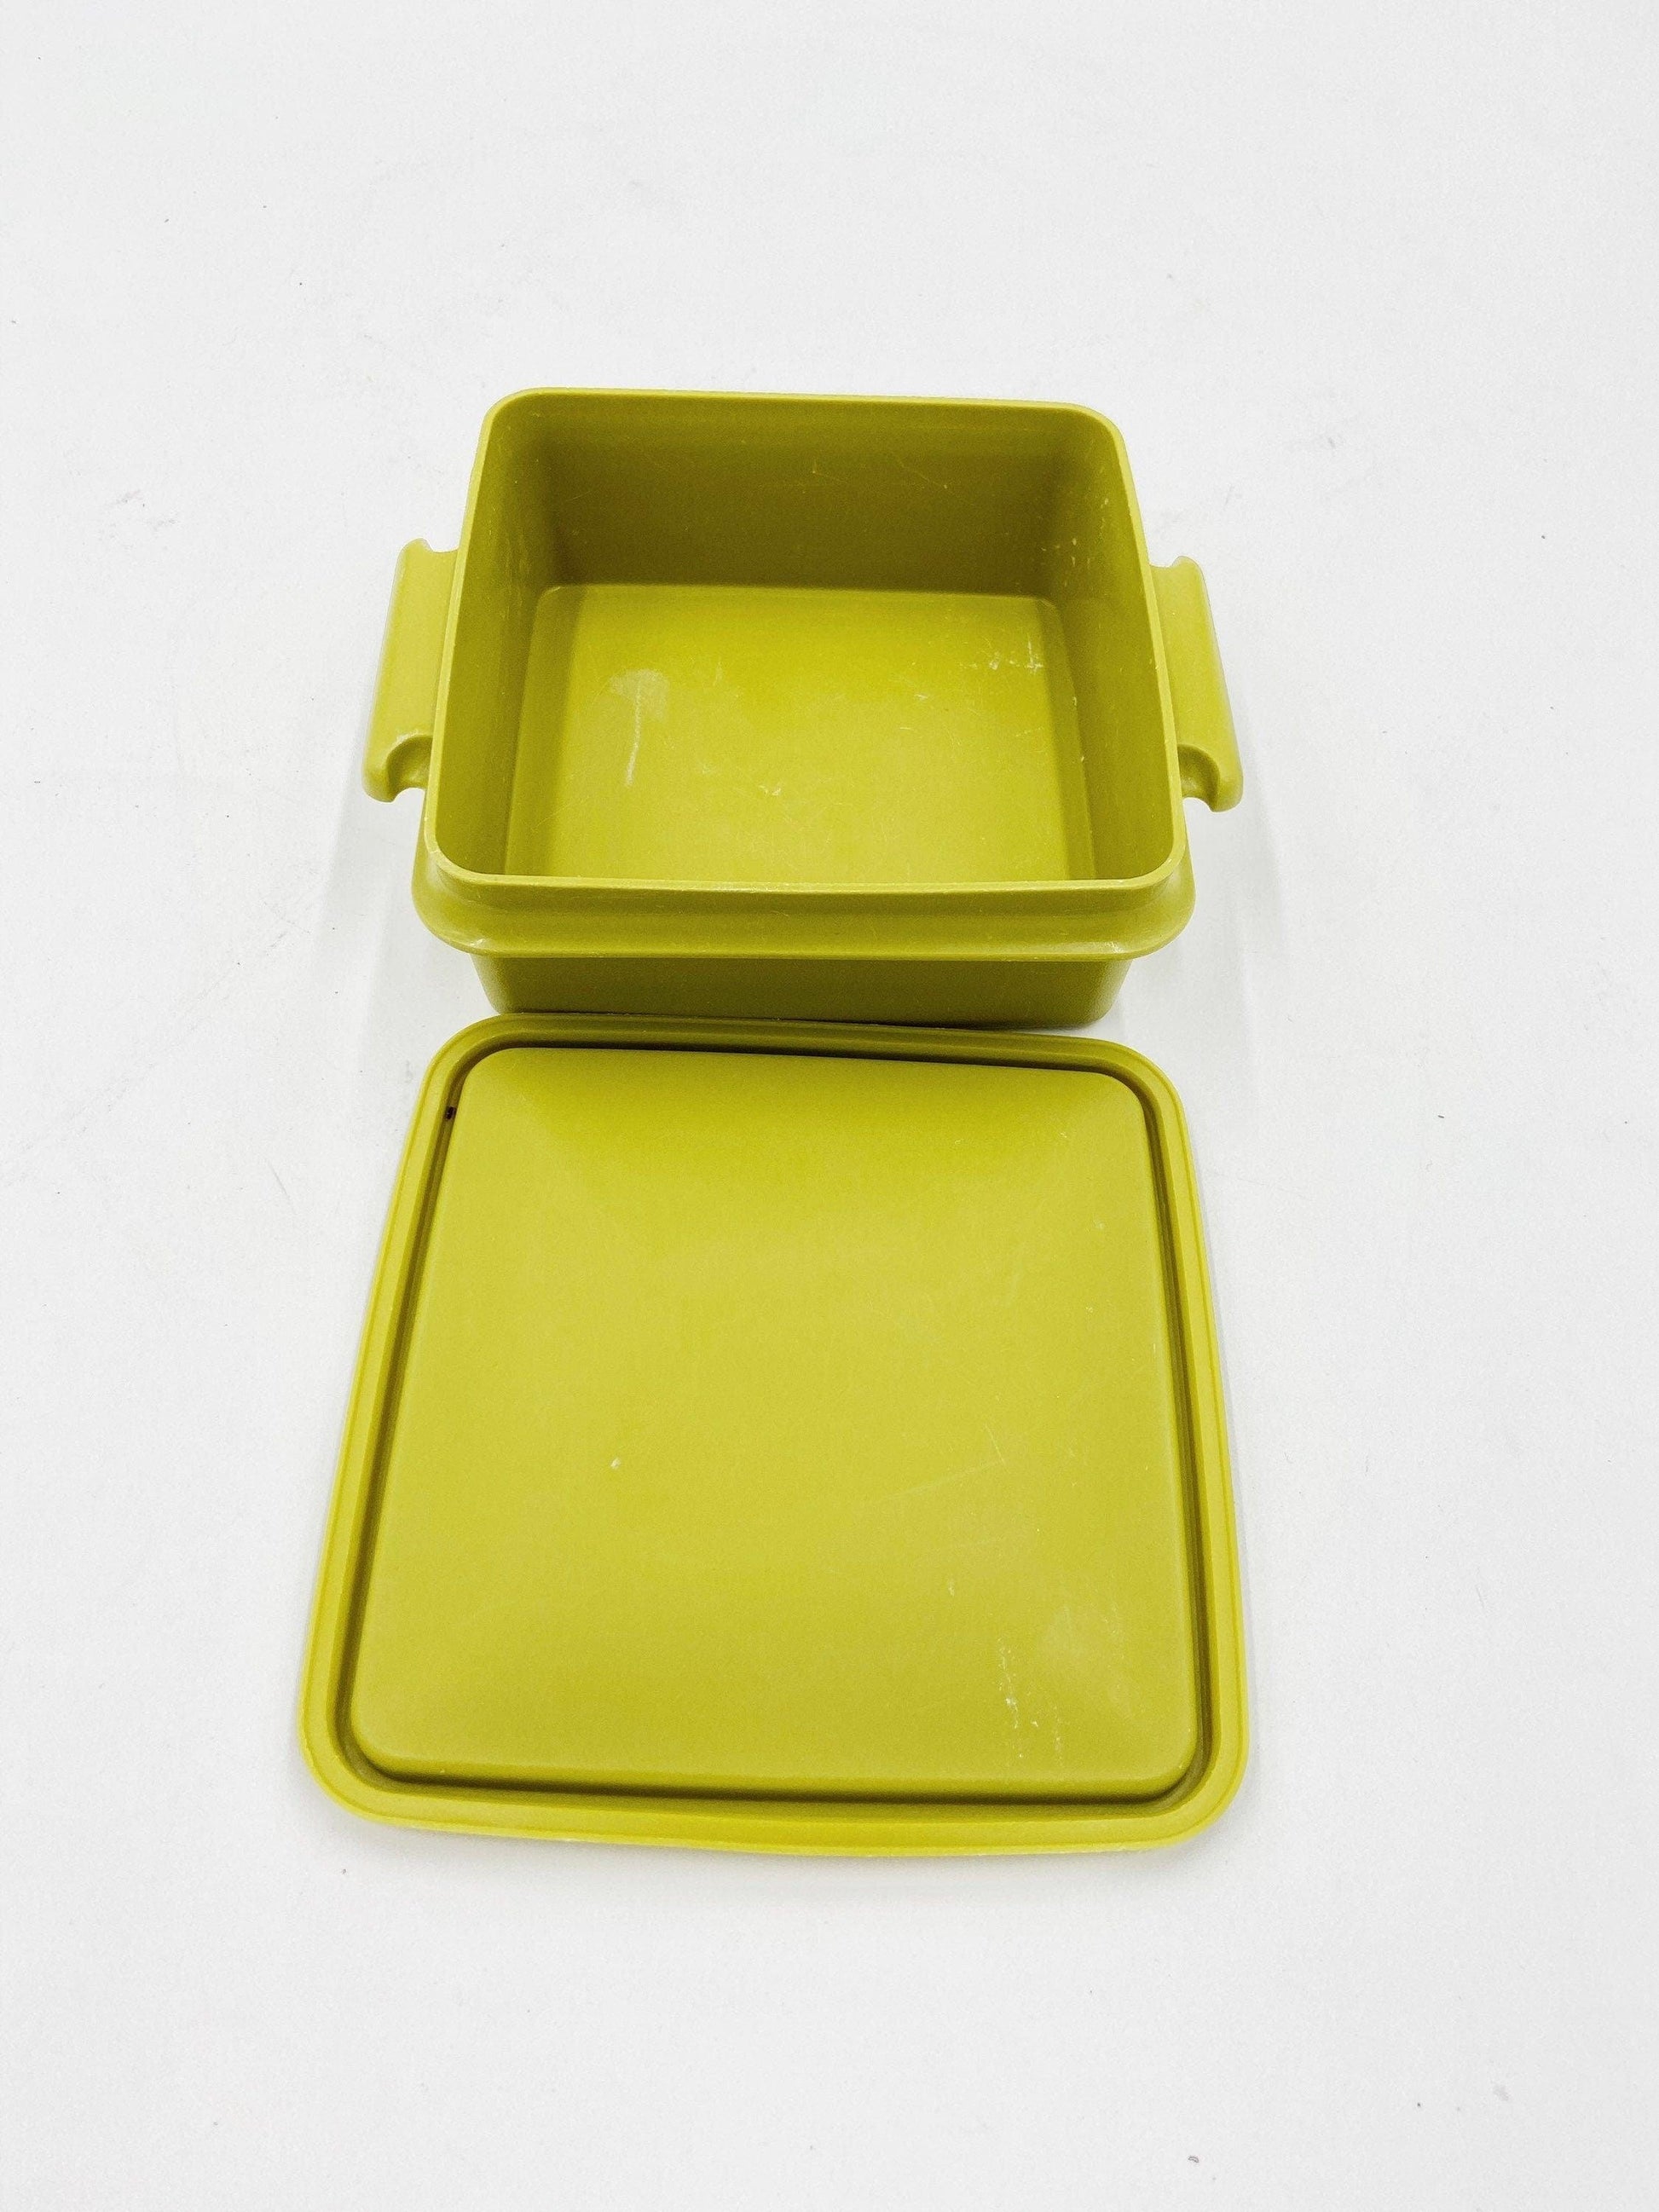 https://funkyhousevintage.com/cdn/shop/files/vintage-green-tupperware-square-stacking-bowl-antique-tupper-ware-food-storage-retro-kitchen-mid-century-modern-kitchen-decor-1970s-located-at-funkyhouse-vintage-antique-store-weiser_eefa416d-48bd-4d99-8f16-a72dfb15894d.jpg?v=1688592973&width=1946